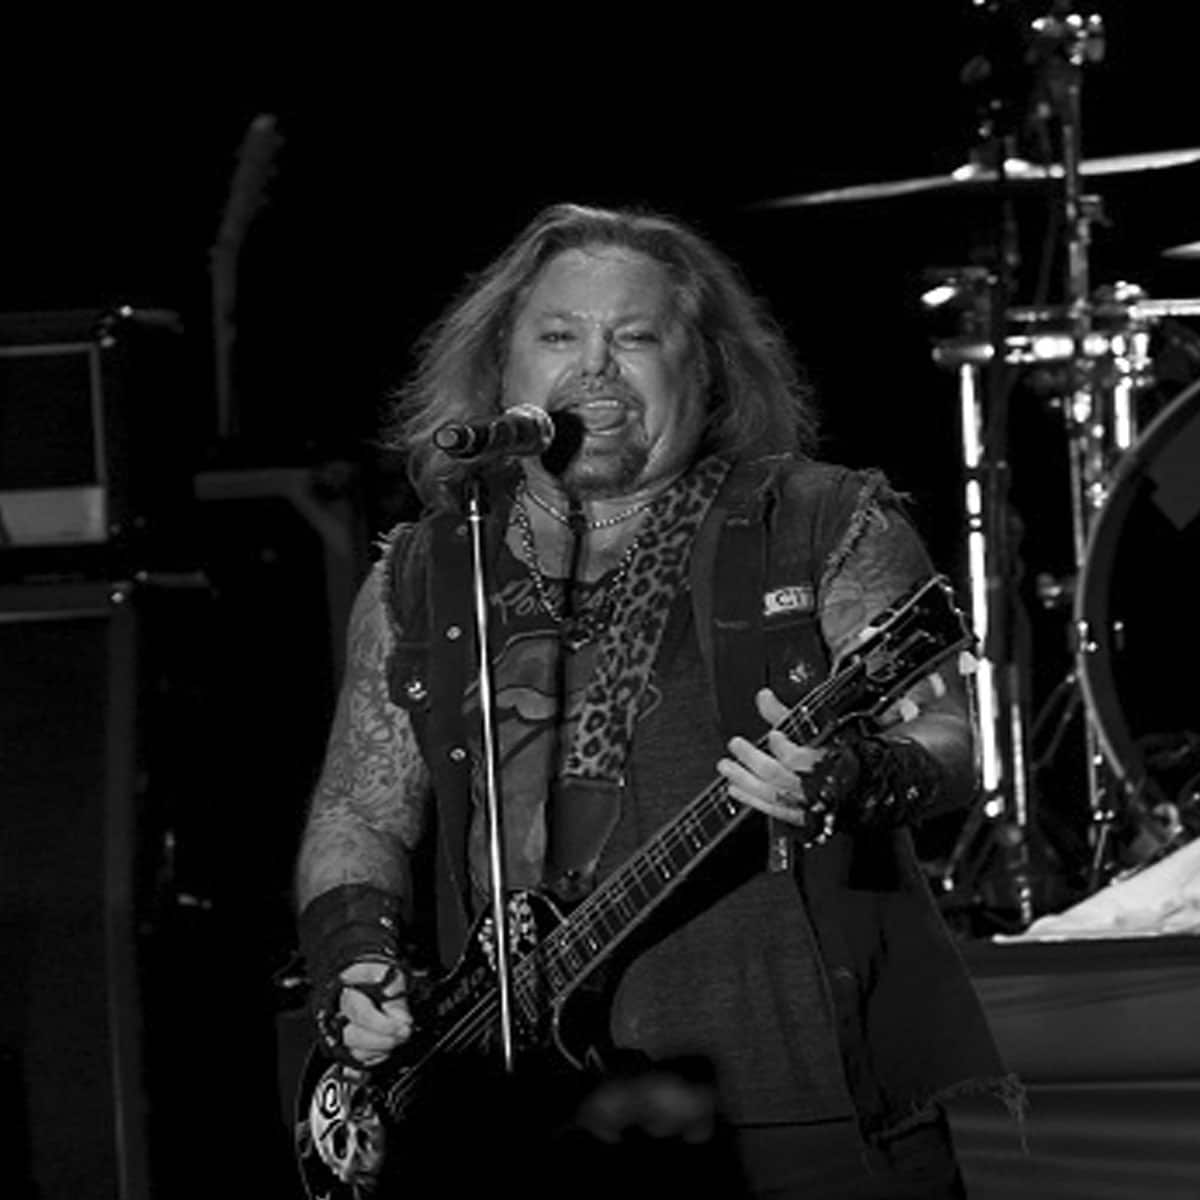 Vince Neil of Motley Crue performs at the Kentucky State Fair